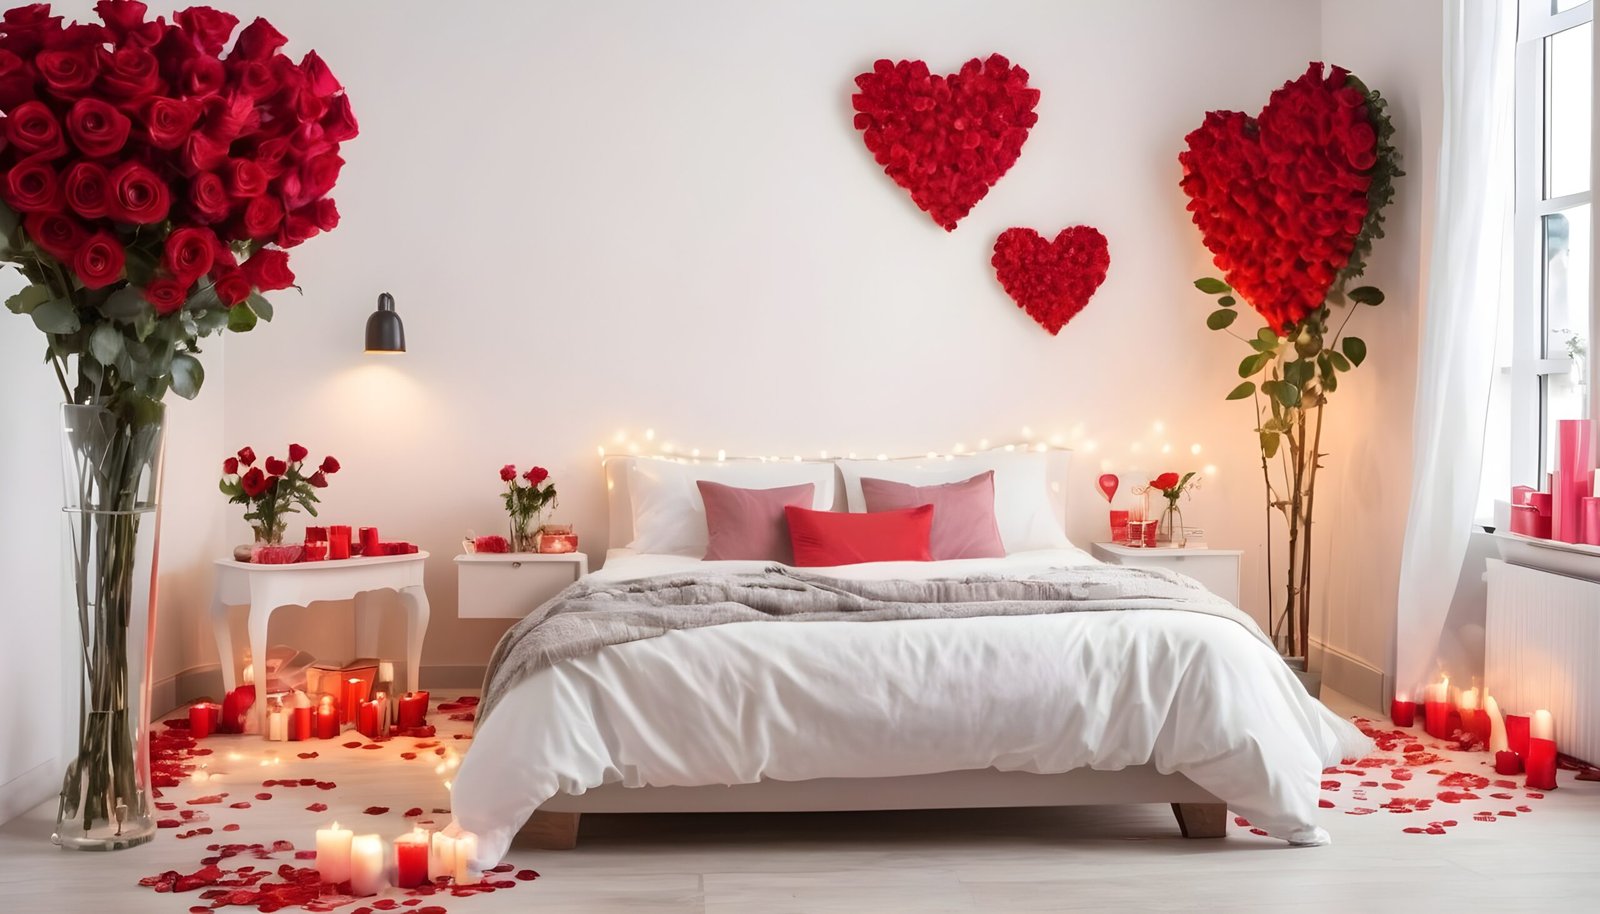 Romantic bedroom with roses, hearts and red decorations.